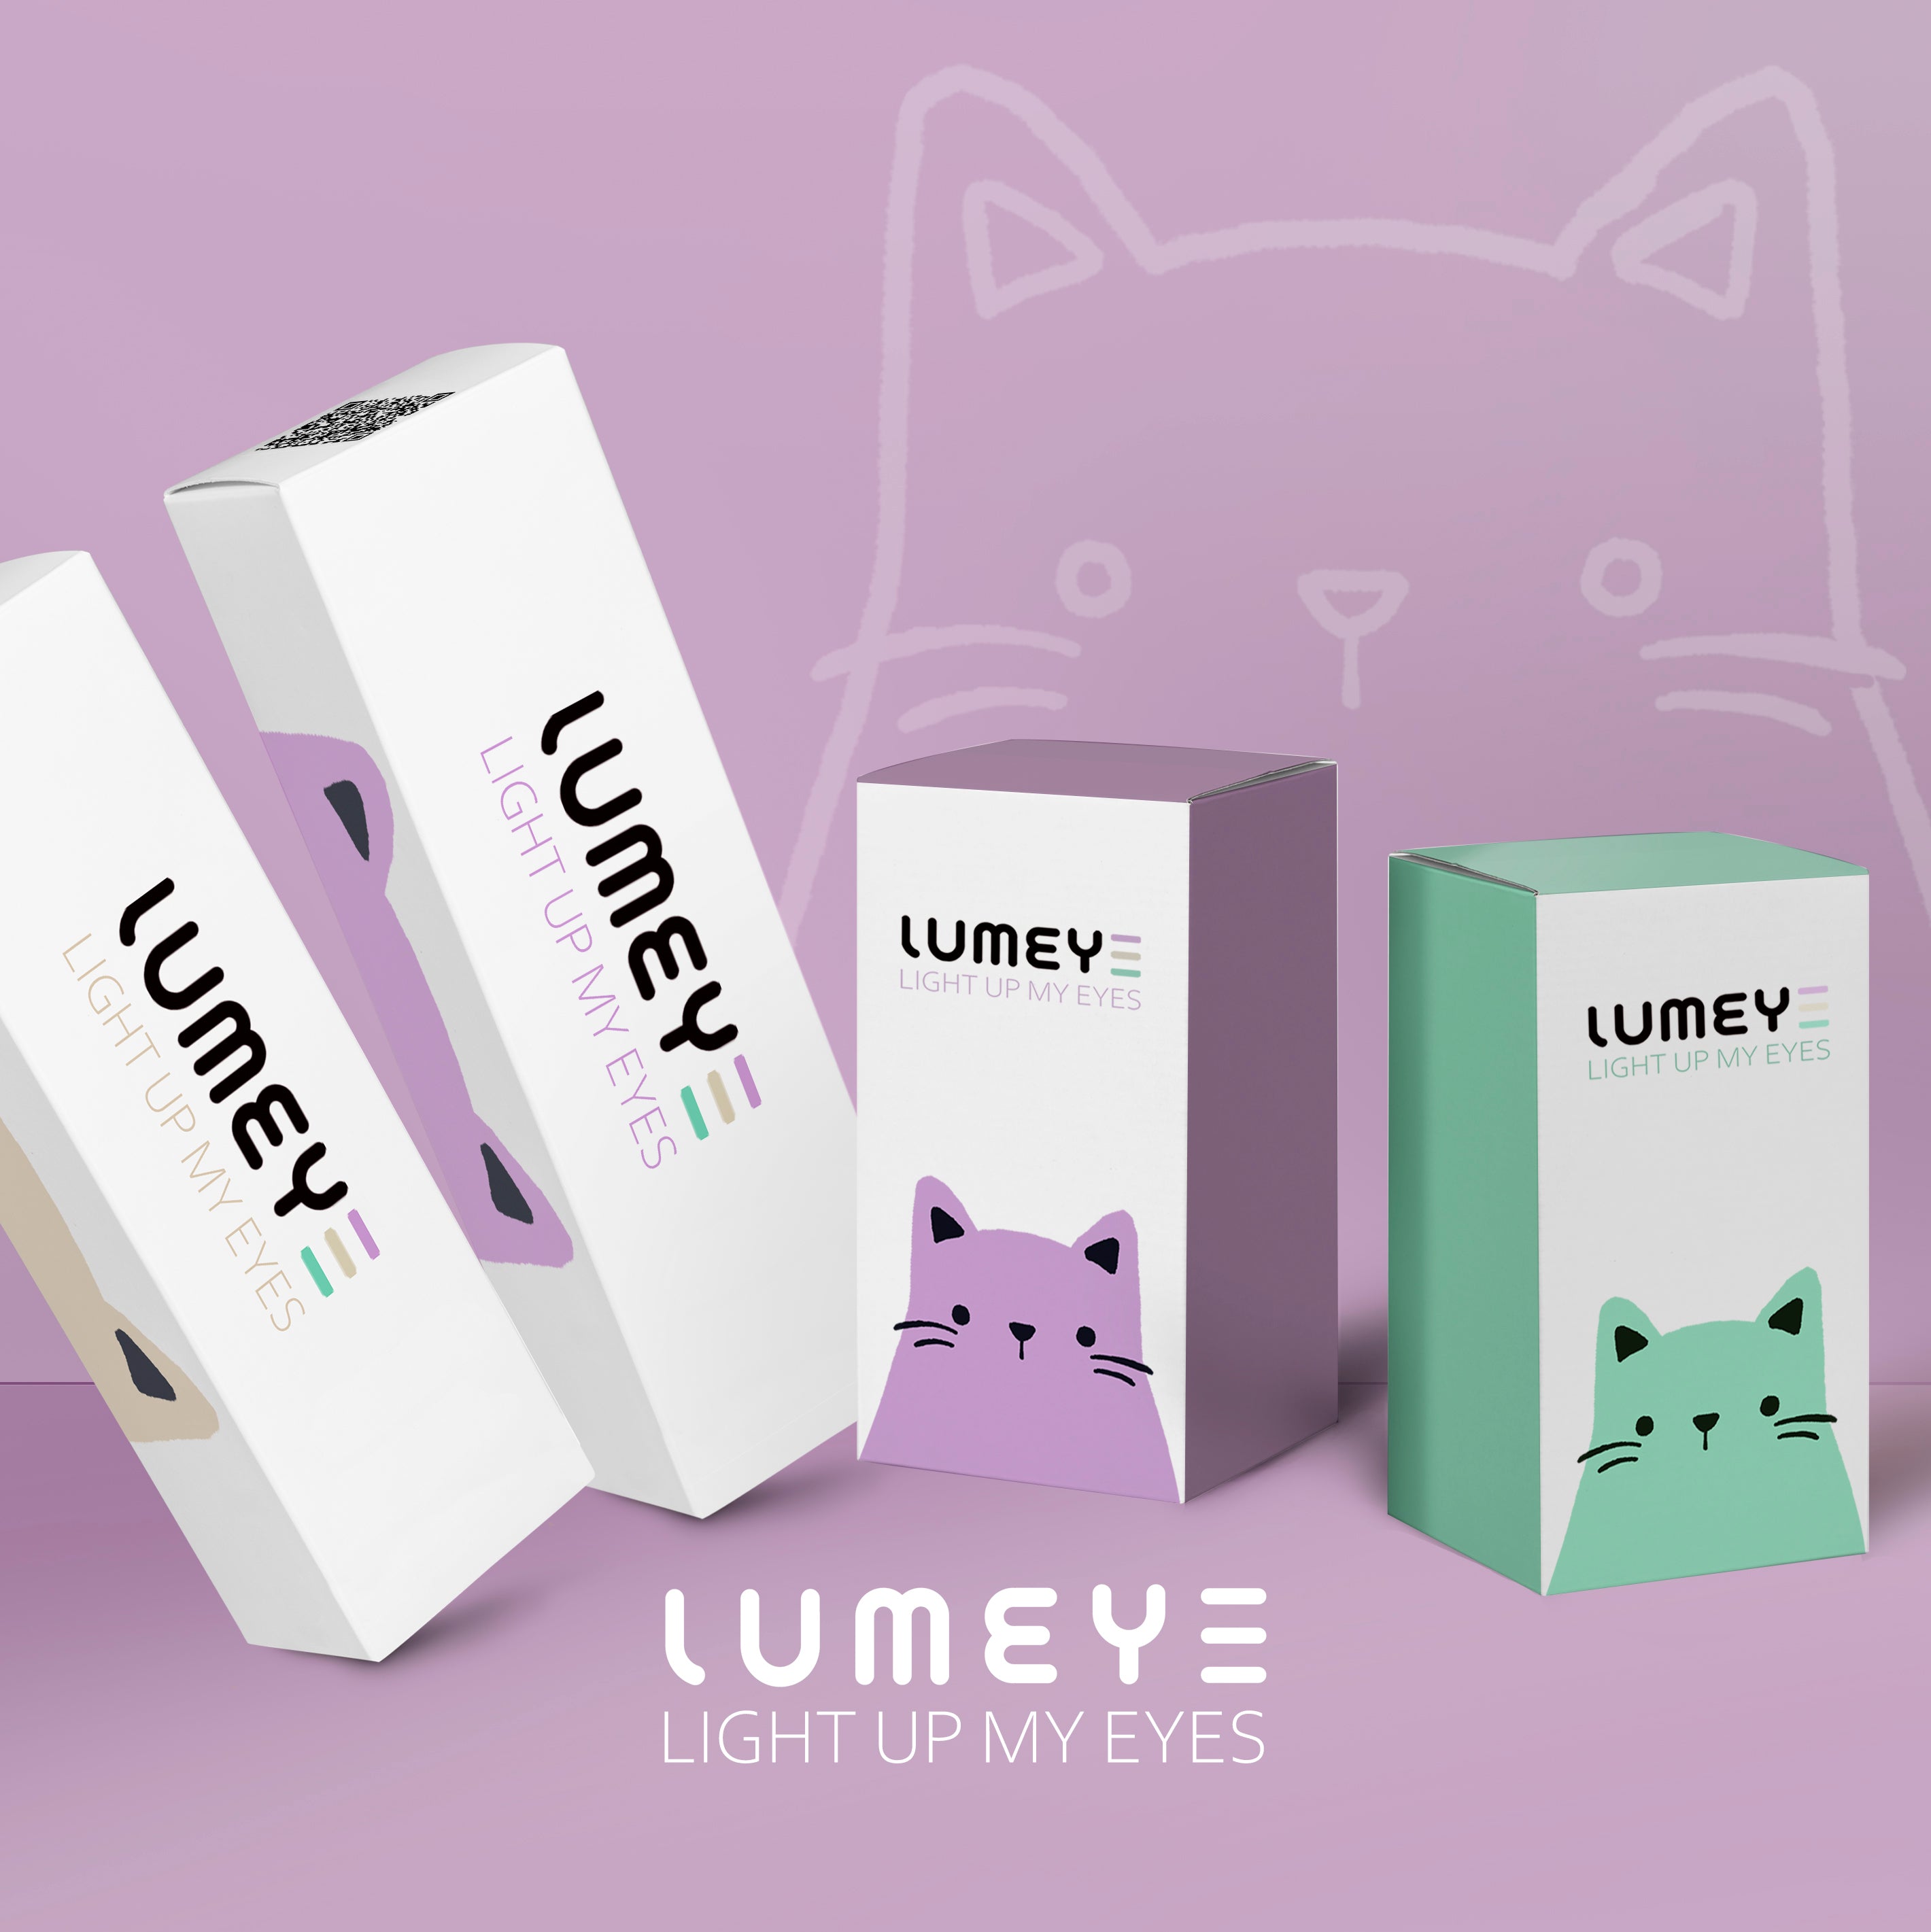 Best COLORED CONTACTS - LUMEYE Twilight Purple Colored Contact Lenses - LUMEYE